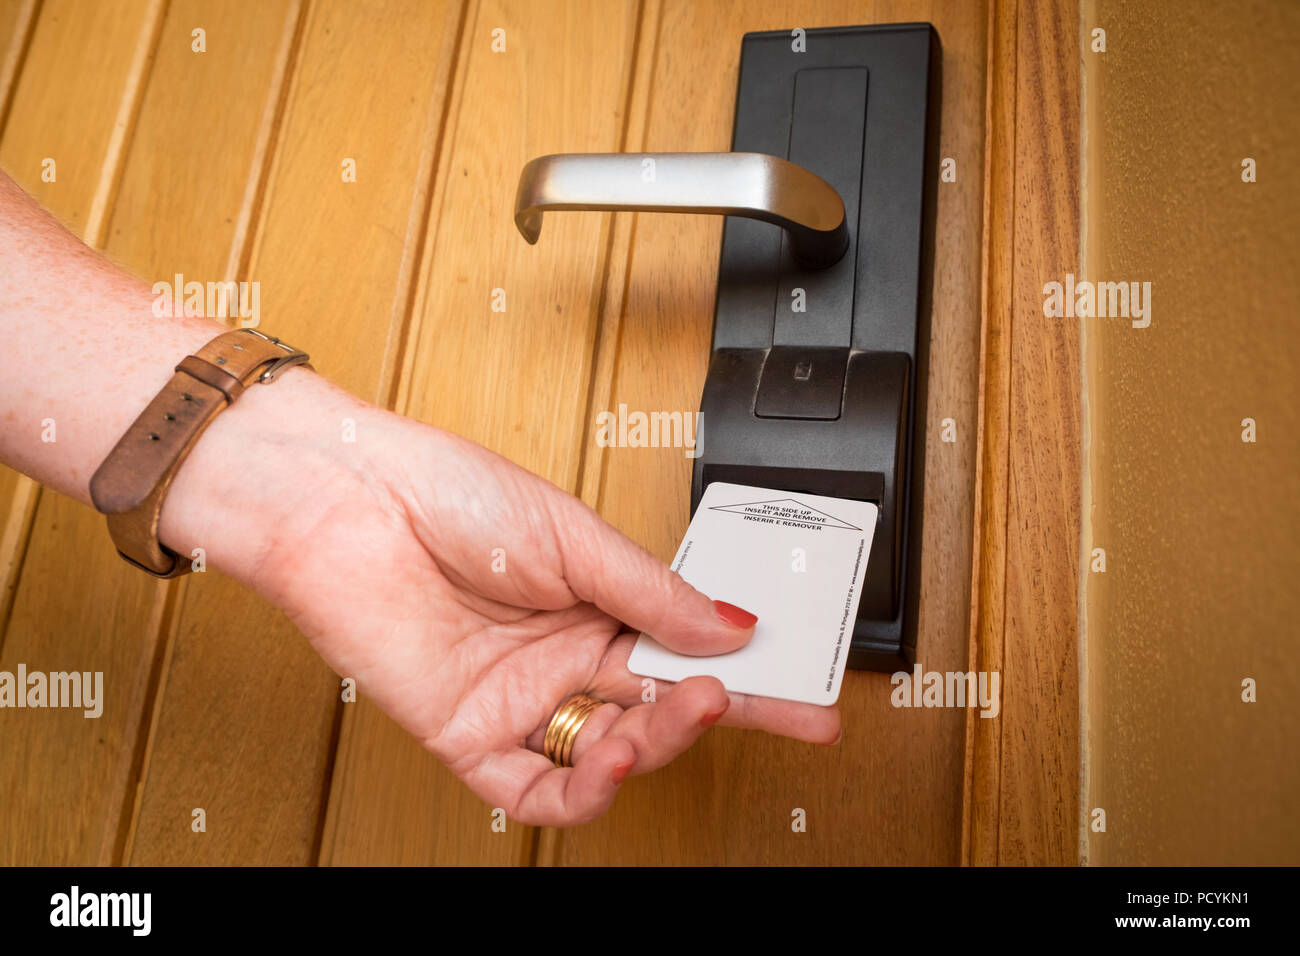 A woman entering a hotel room using an electric key card Stock Photo